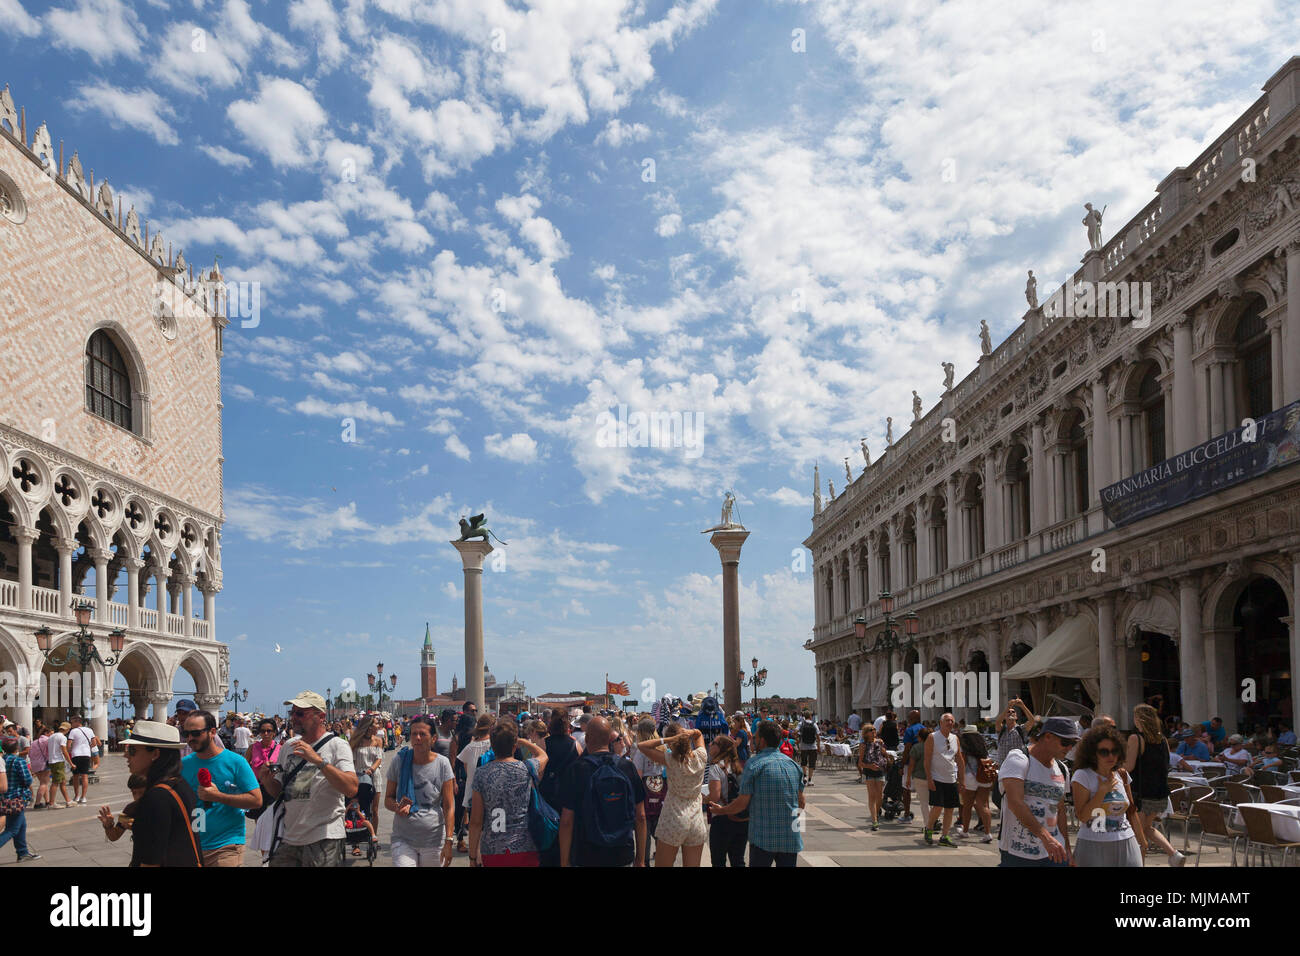 Crowds in St Marks Square, Venice Stock Photo